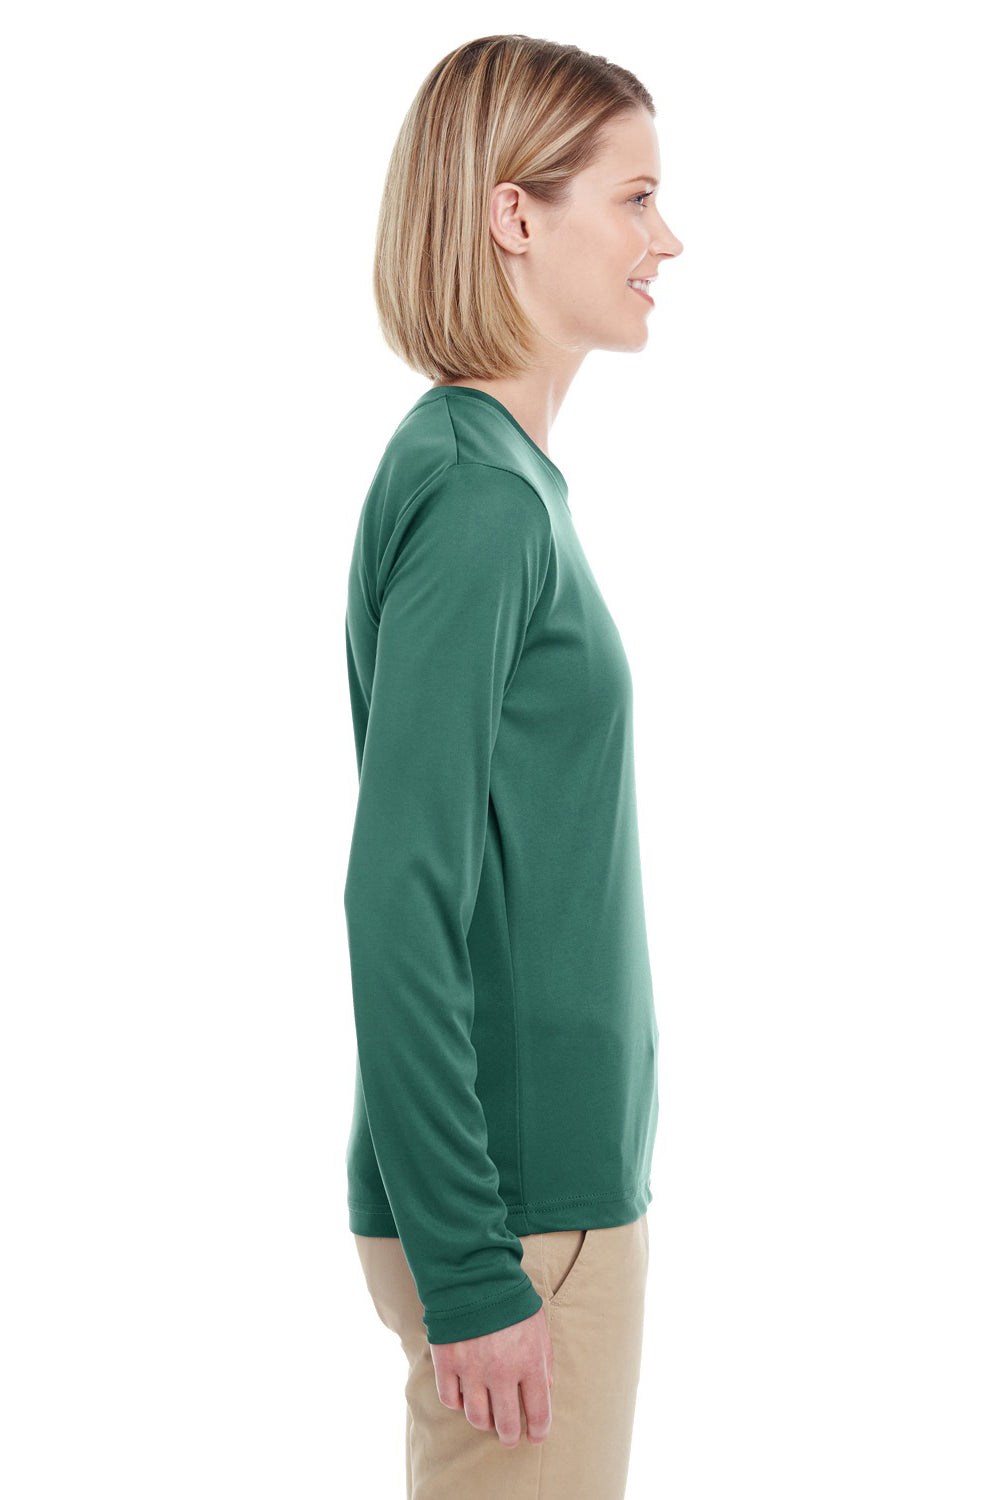 UltraClub 8622W Womens Cool & Dry Performance Moisture Wicking Long Sleeve Crewneck T-Shirt Forest Green Side